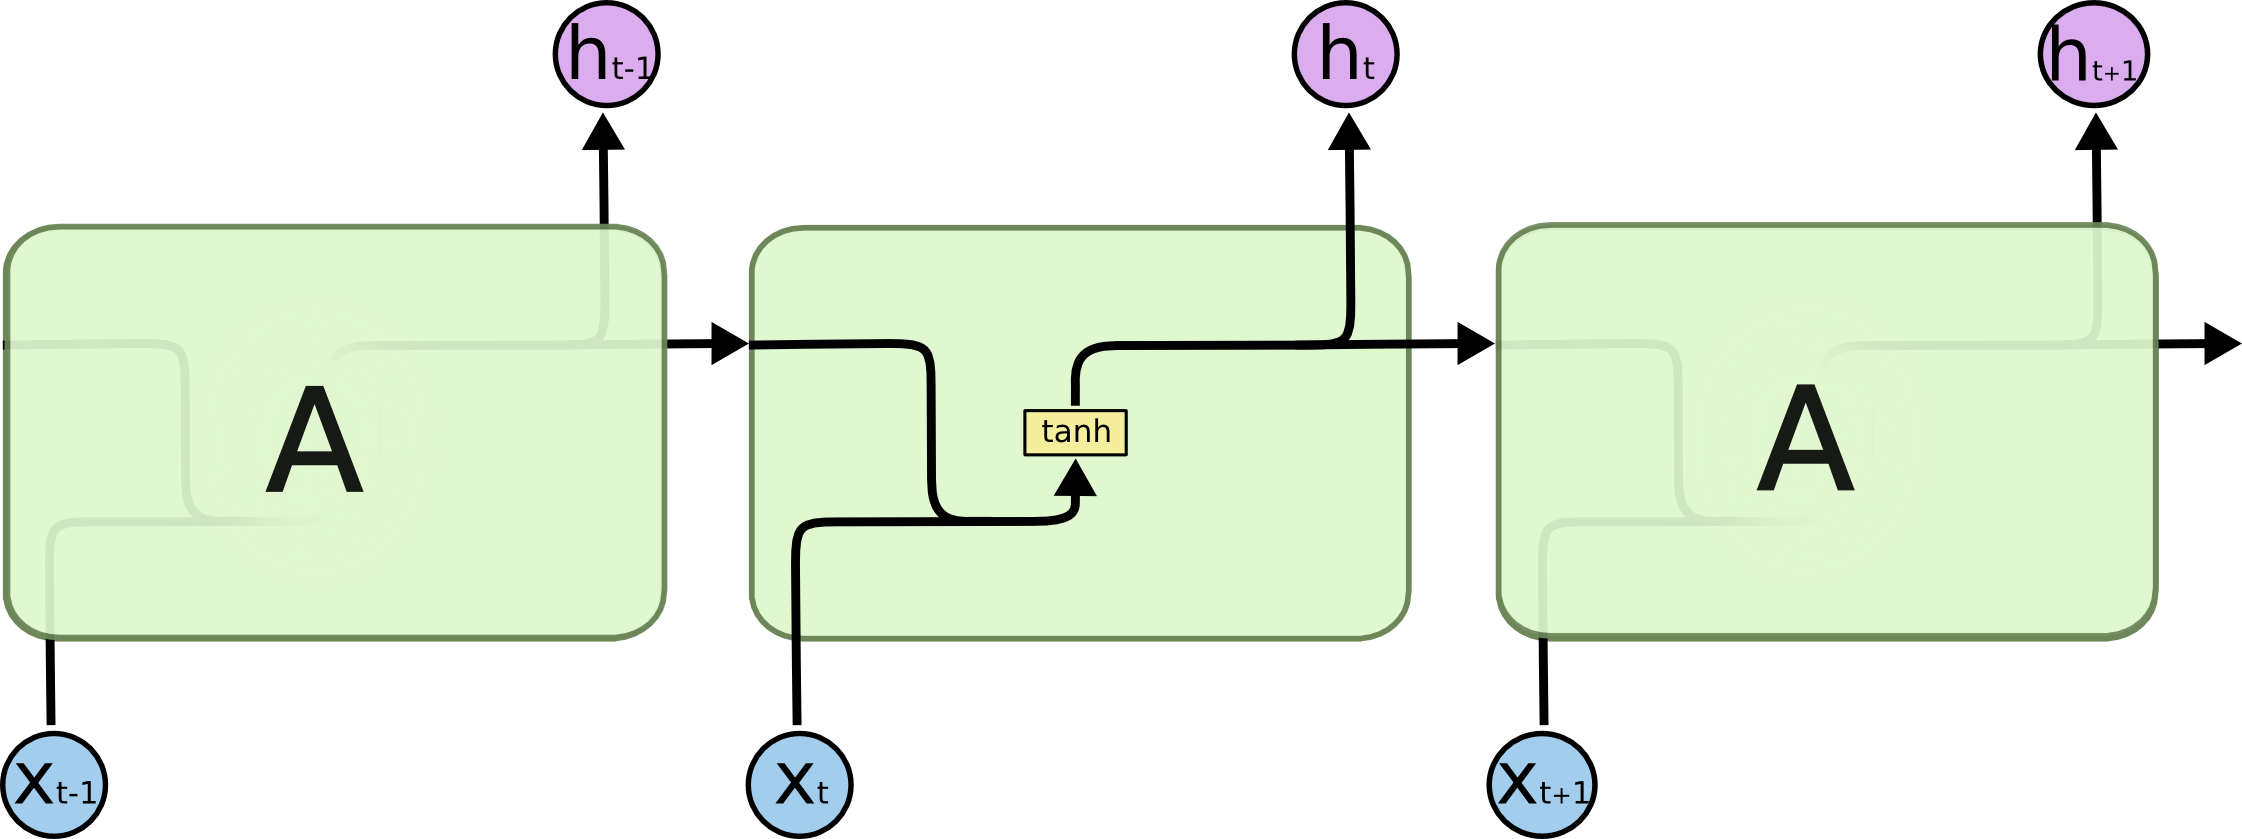 The repeating module in a standard RNN contains a single layer